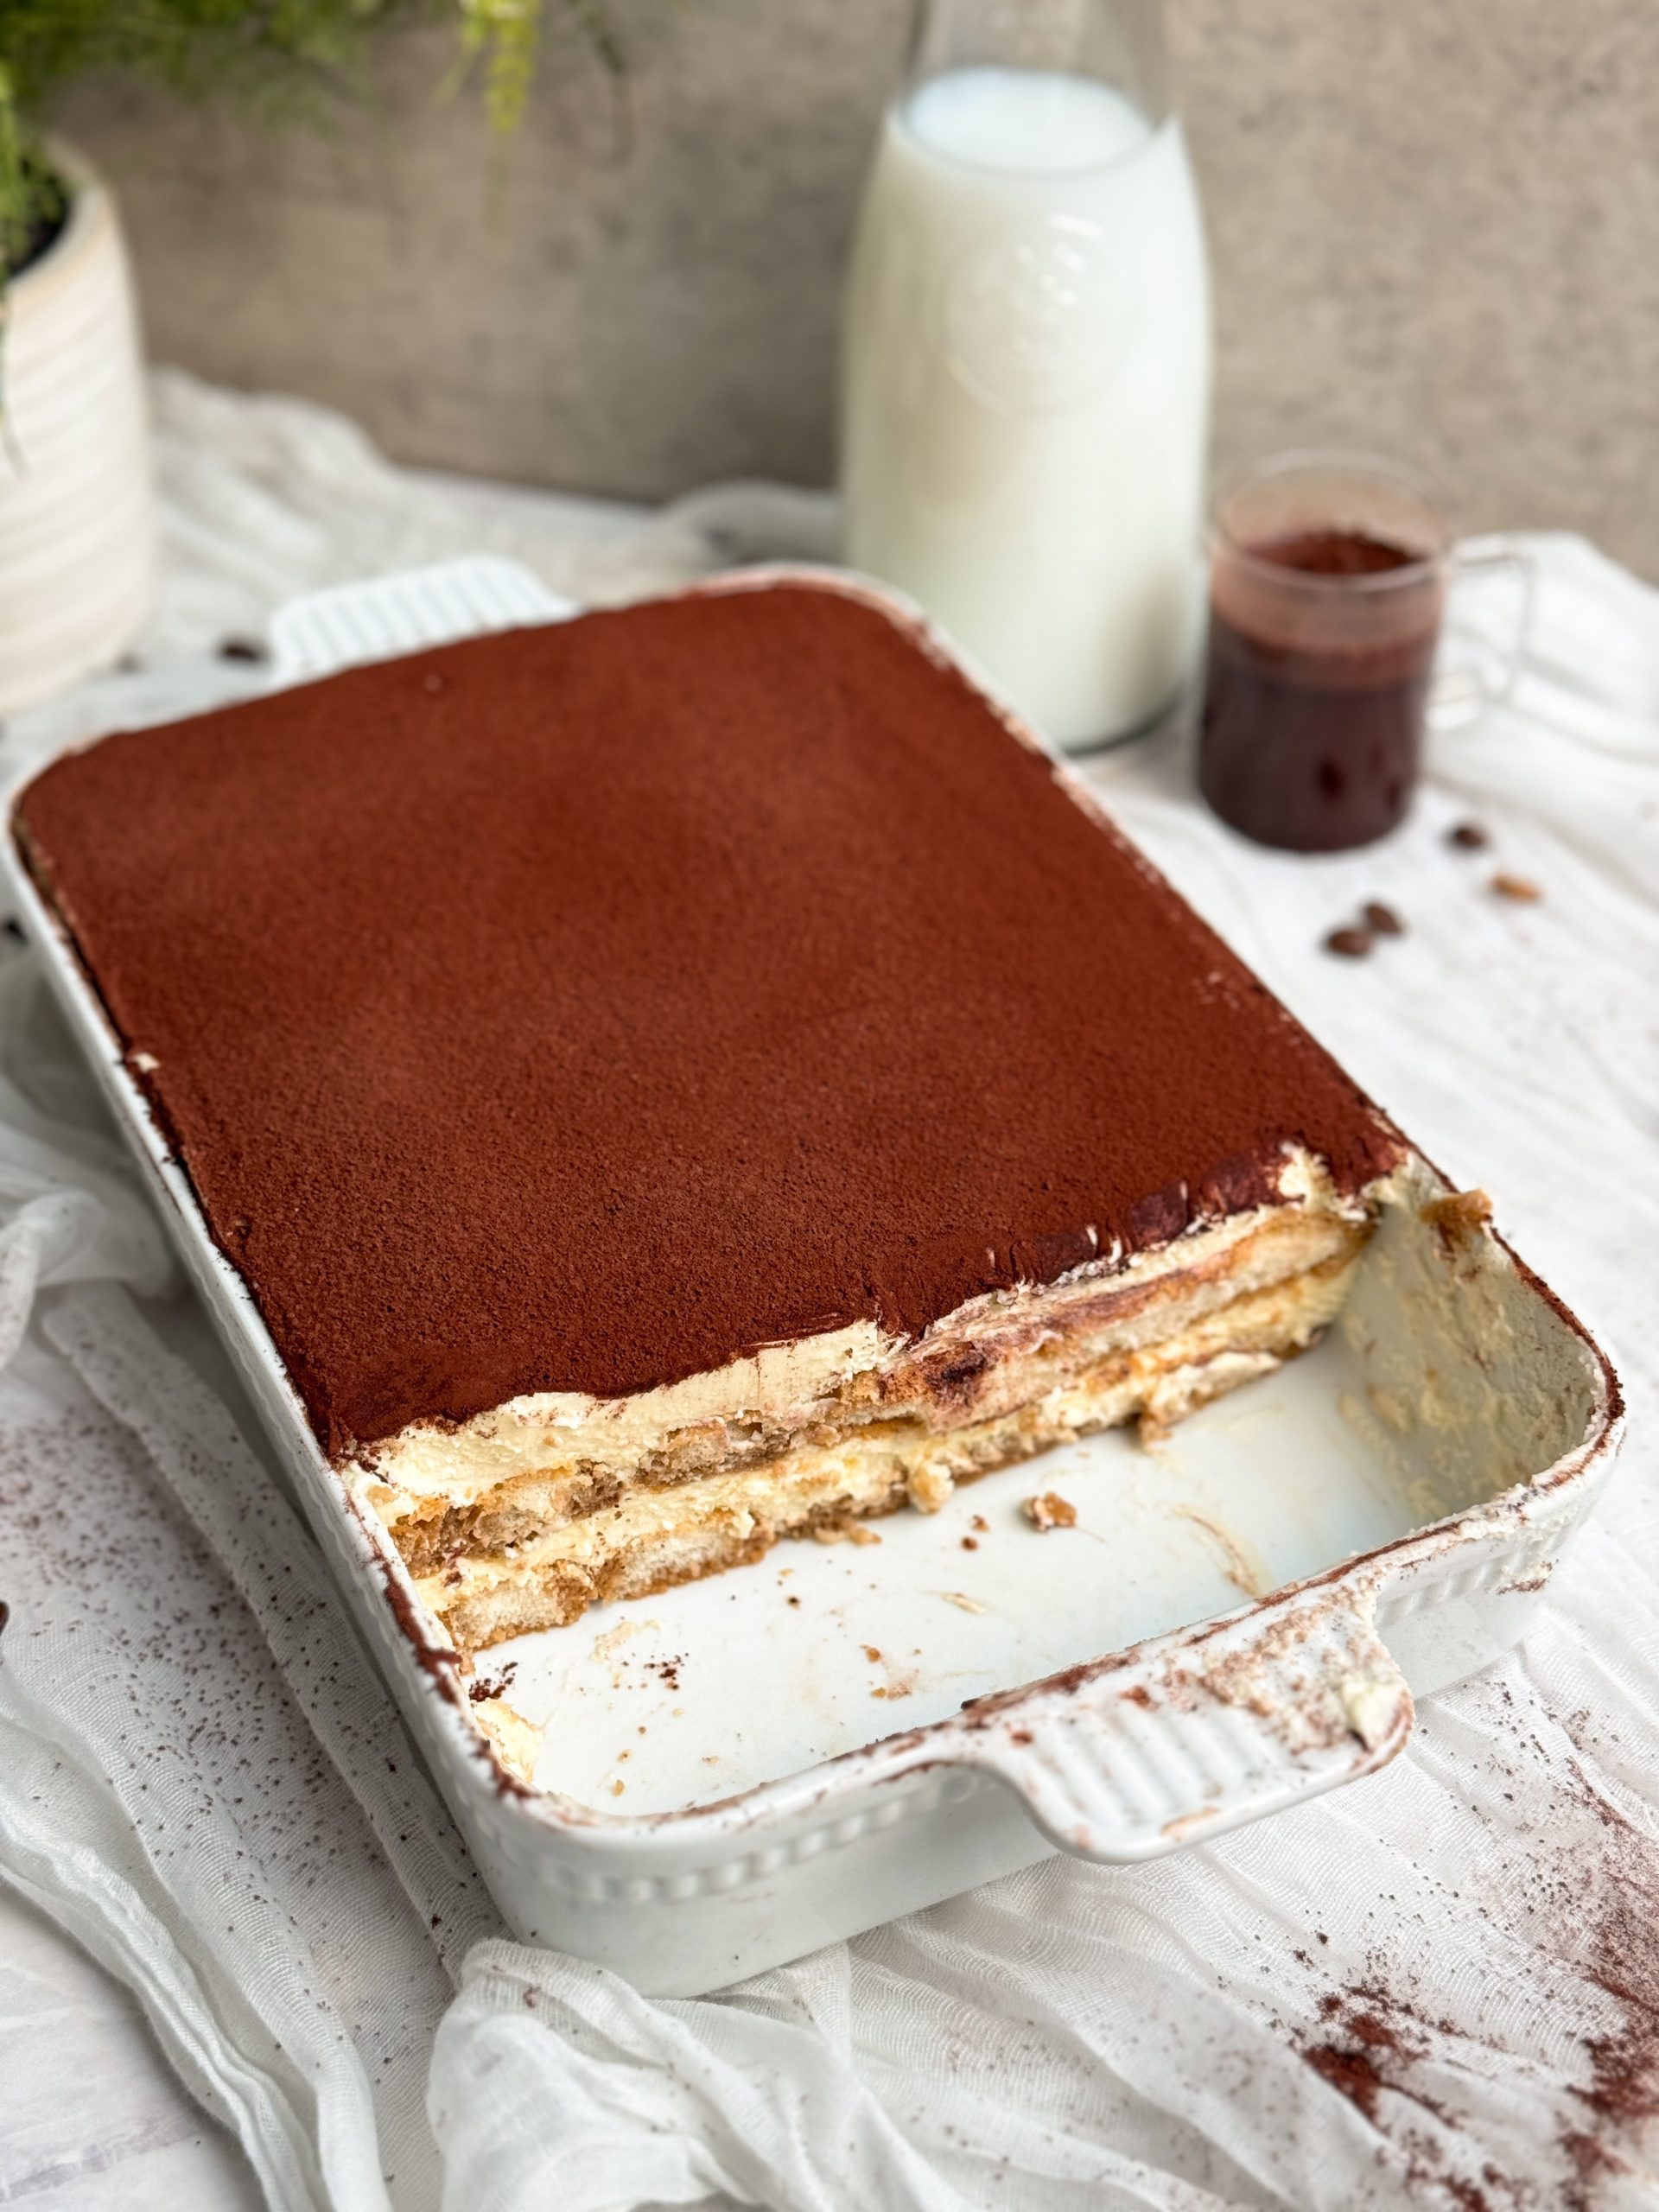 tiramisu in a rectangular dish with a slice taken out to show layers inside